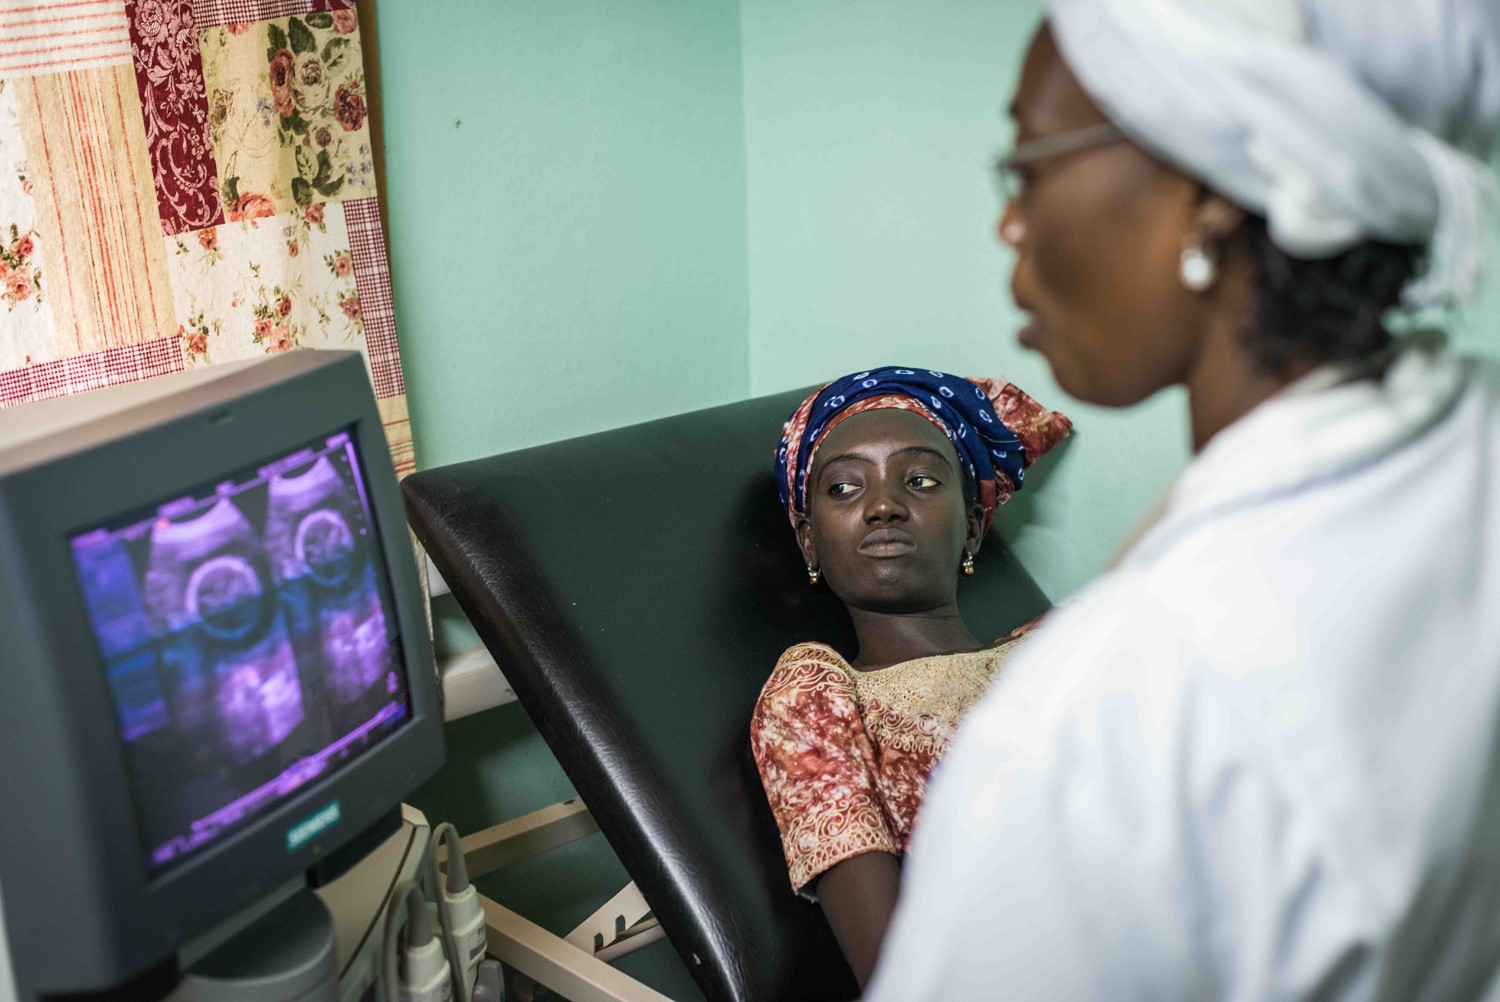 An expectant mother receives an ultrasound as part of MRC research on maternal and child nutrition. Credit: MRC International Nutrition Group, MRC Unit The Gambia at LSHTM